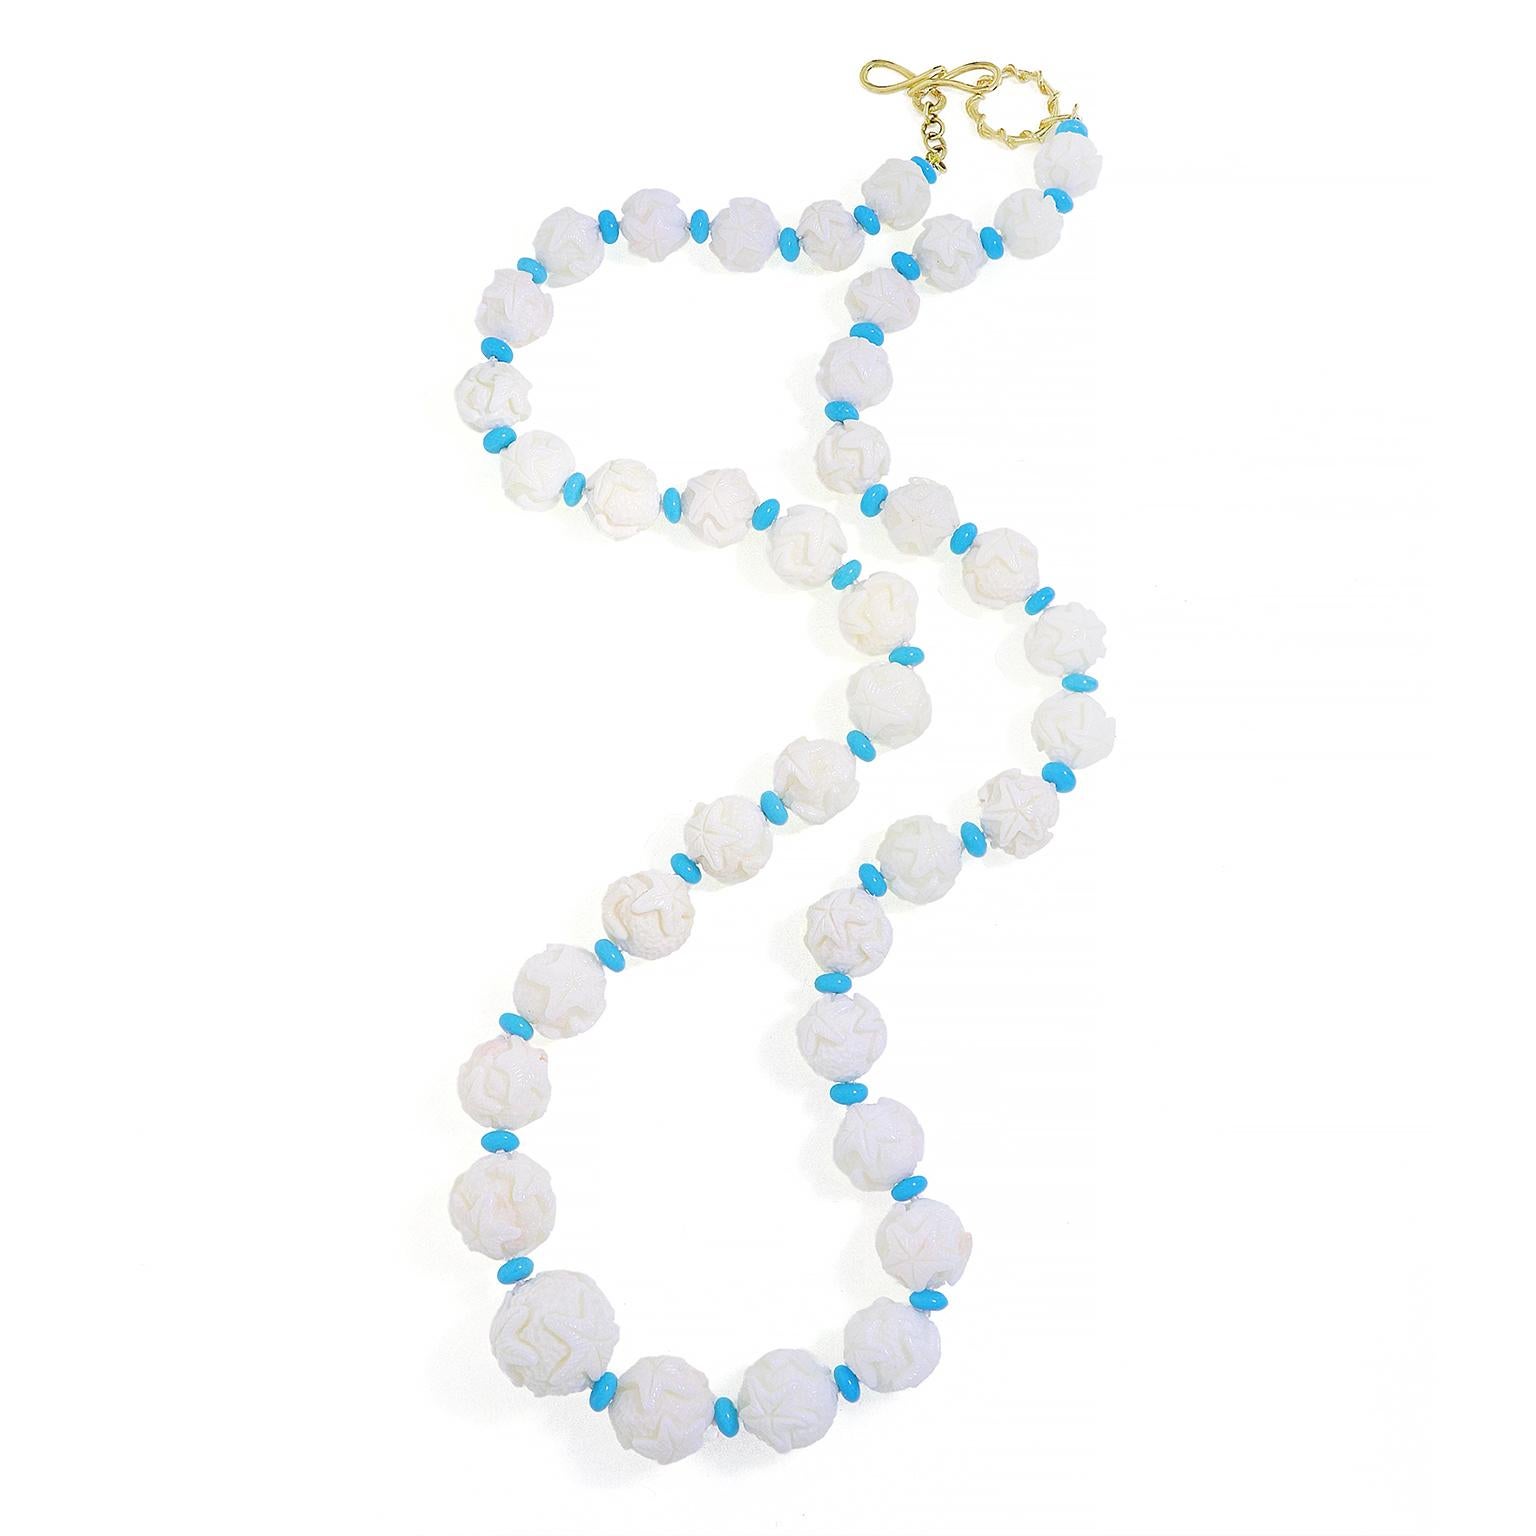 An aquatic ambiance is evoked by this necklace. Graduated orbs of white coral are carved with a starfish emblem. In between each orb is a single turquoise rondelle, which gives a breath of serene color. An 18k yellow knot and toggle close the